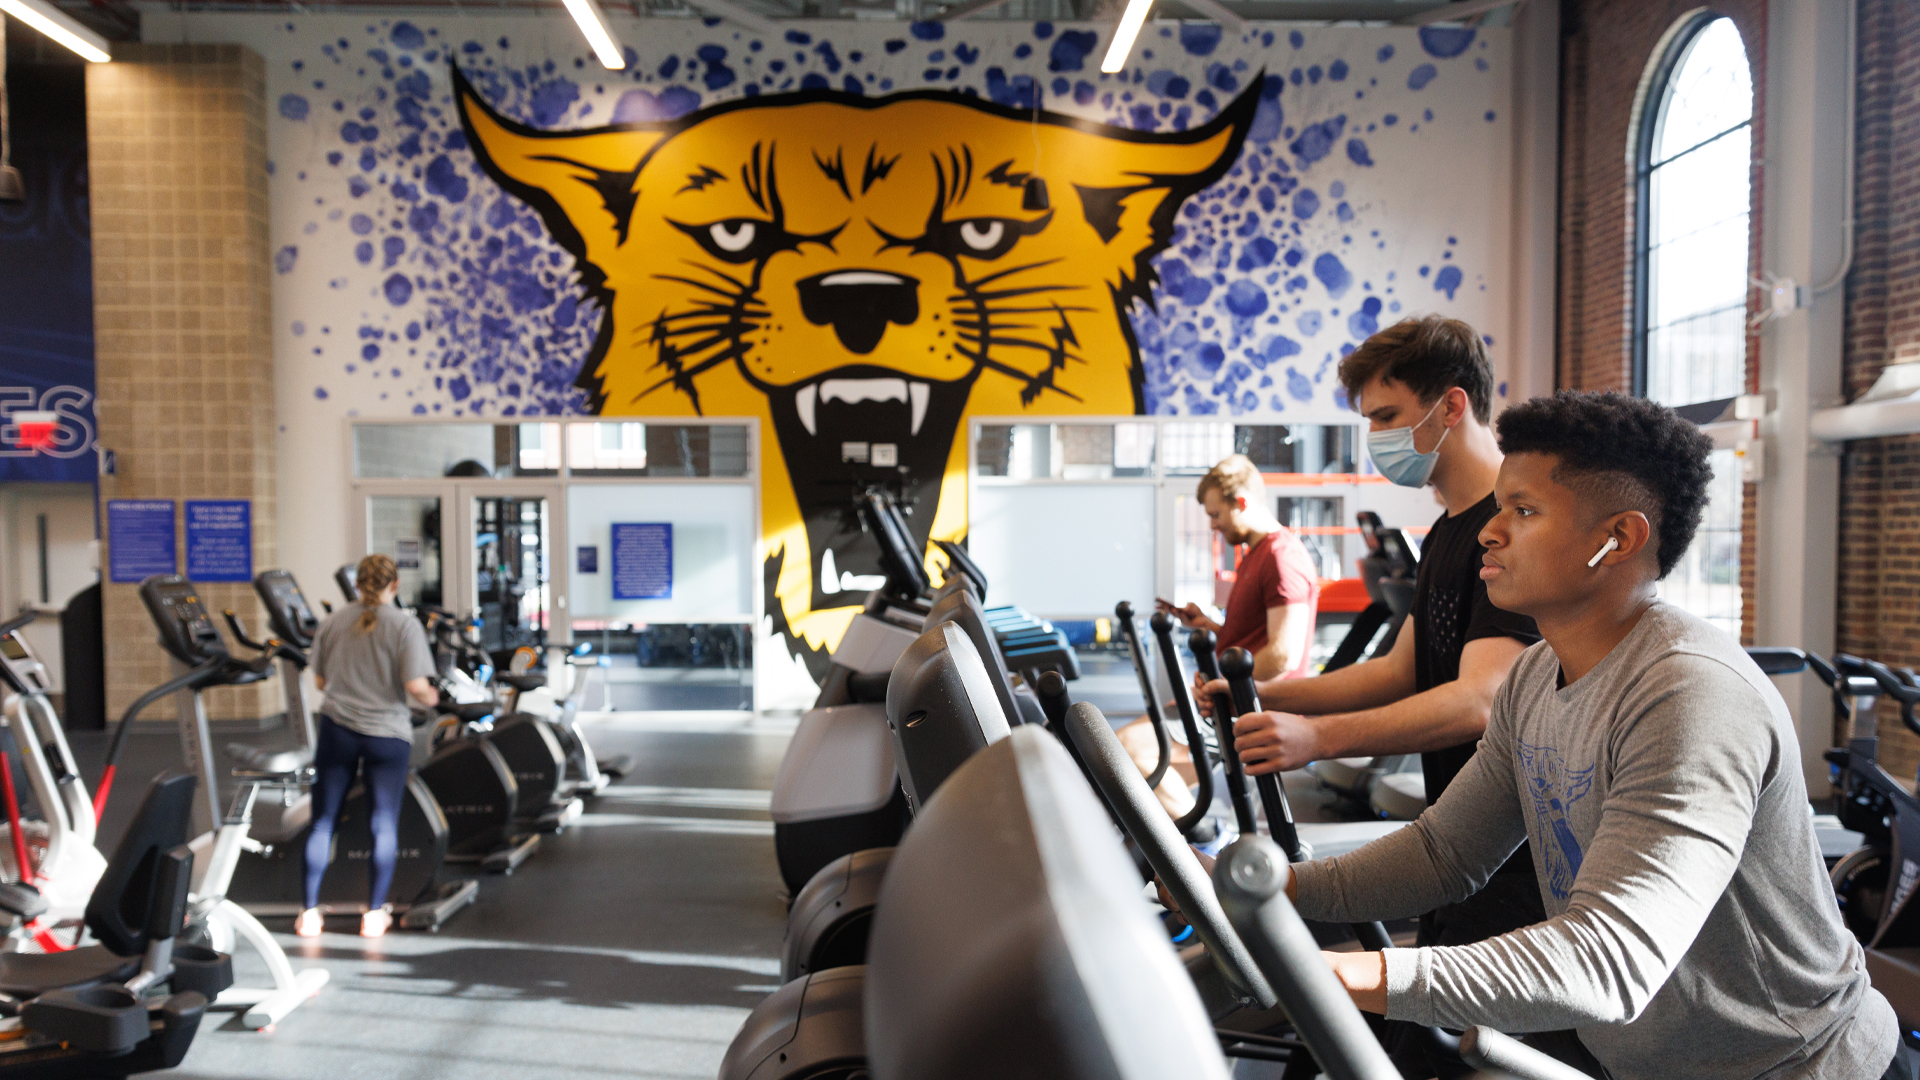 image of students exercising in Alumni Gym with Wildcat mural in background.